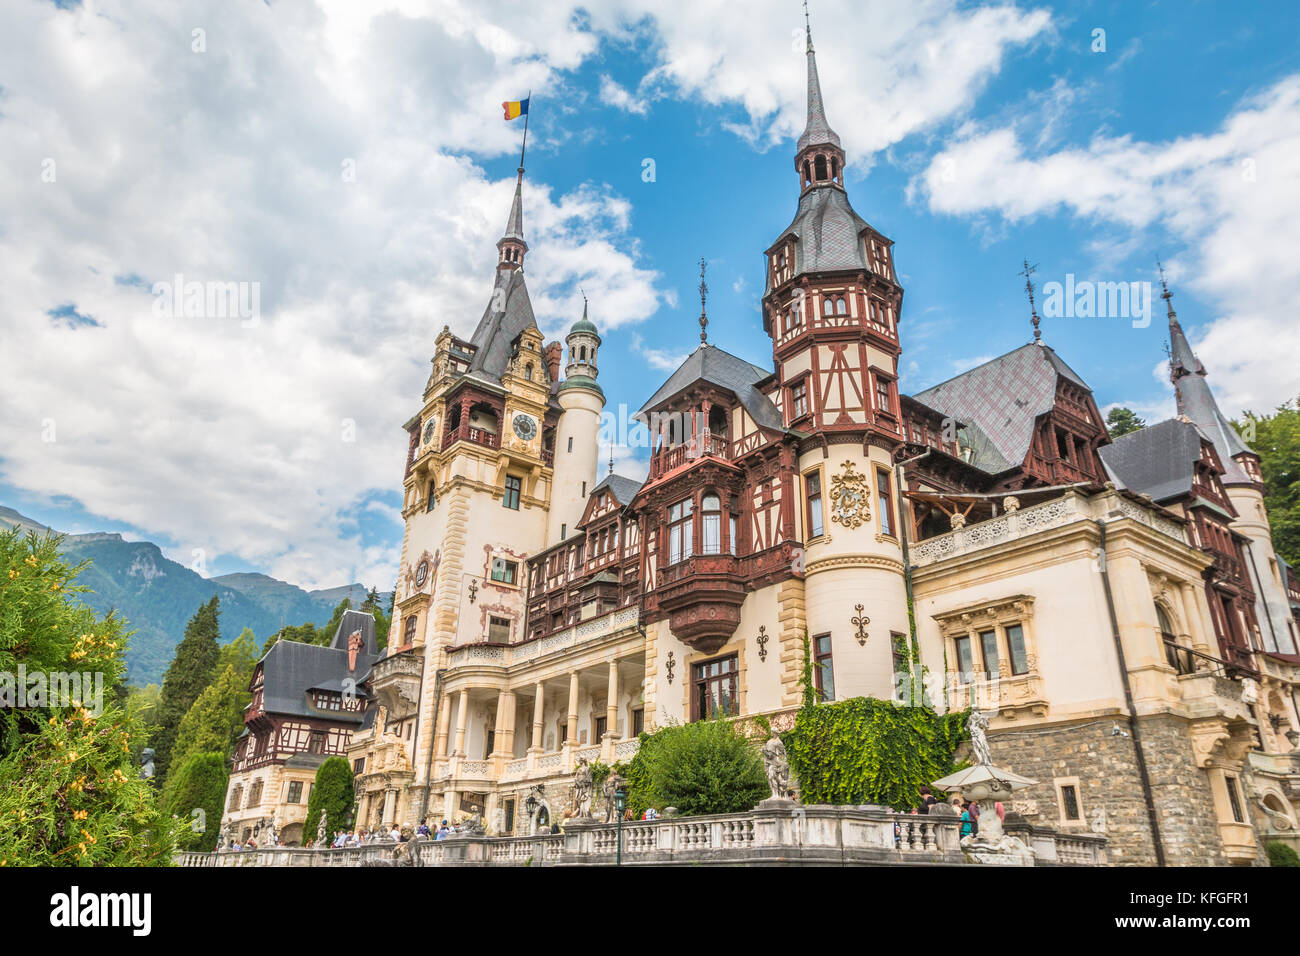 Nice view of Peles Caslte in Romania Stock Photo